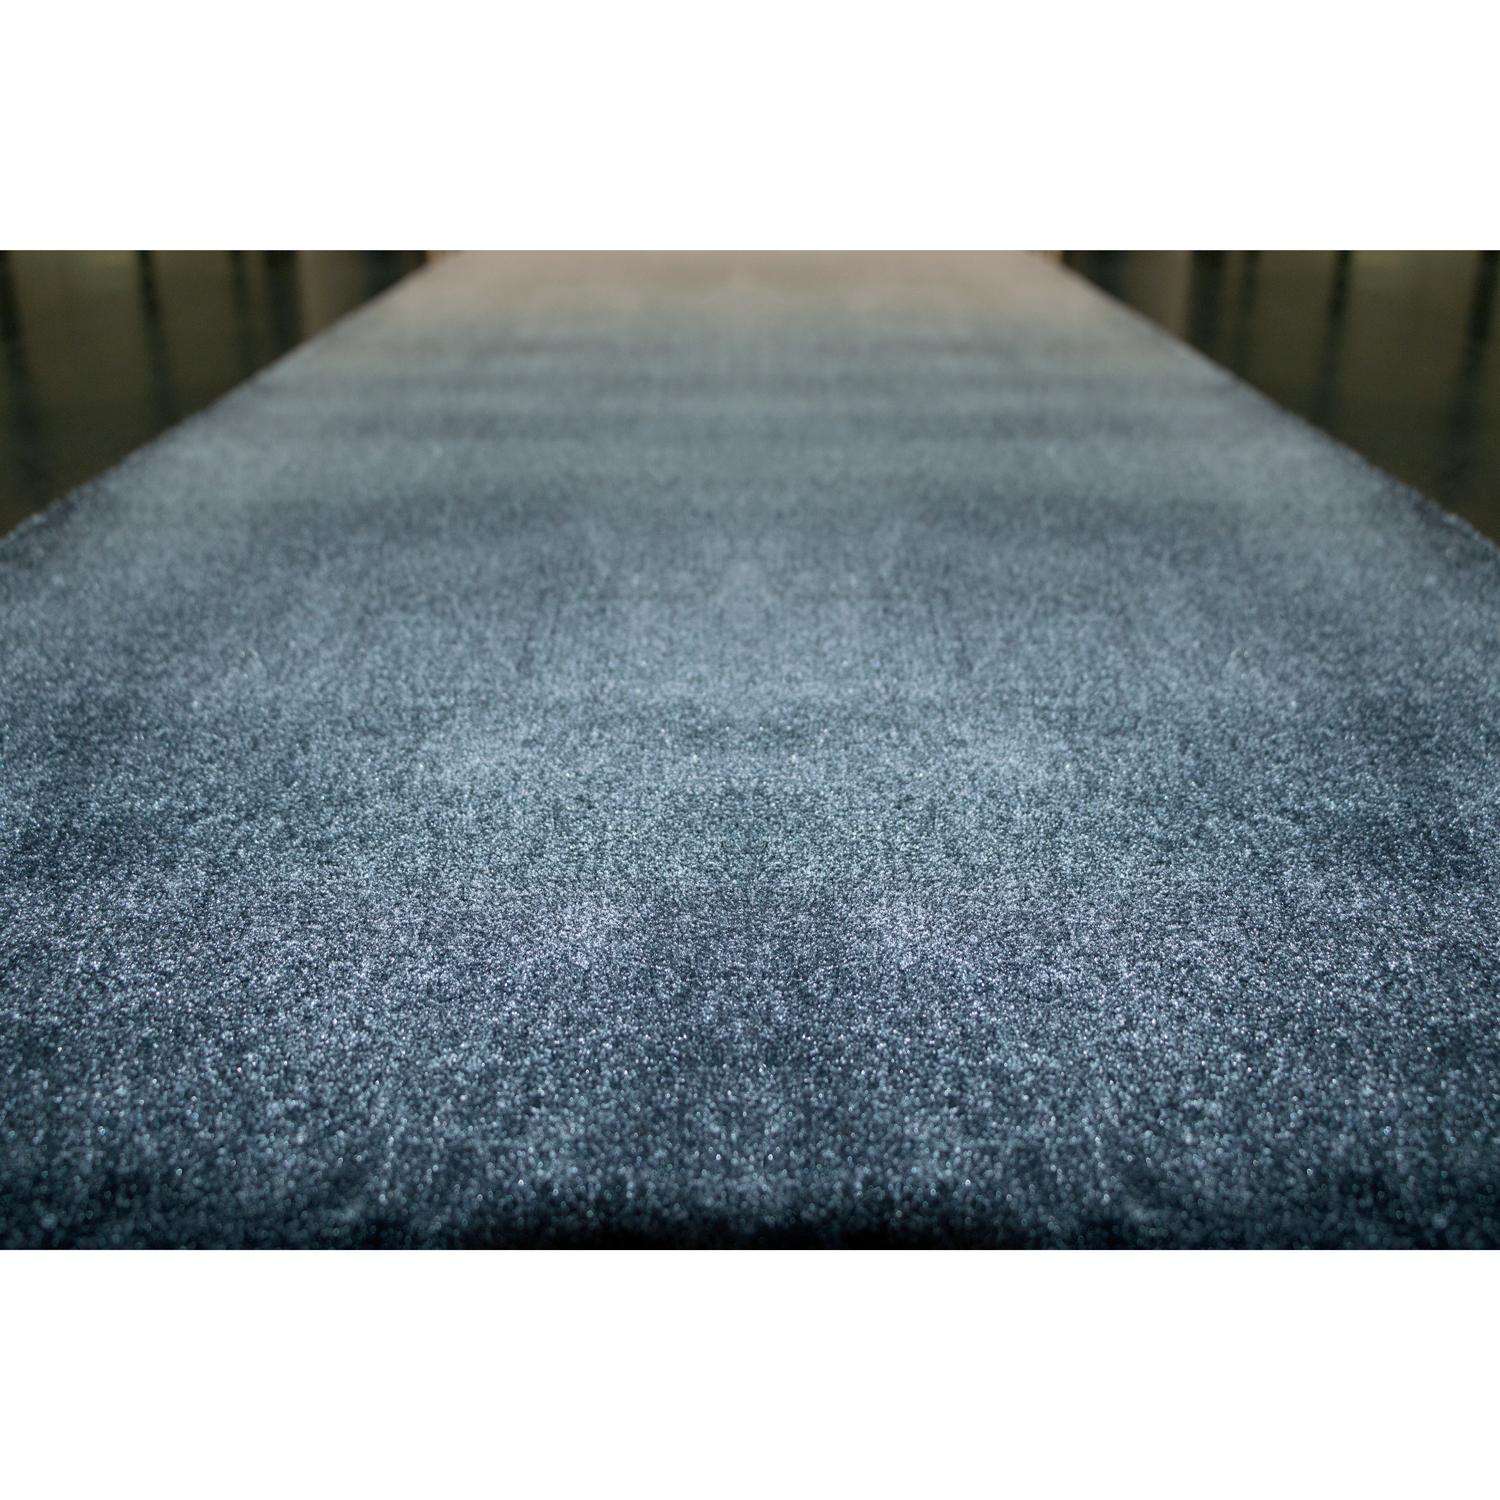 Modern 21st Cent Gradation Beige Dark Blue Rug by Deanna Comellini In Stock 100x240 cm For Sale